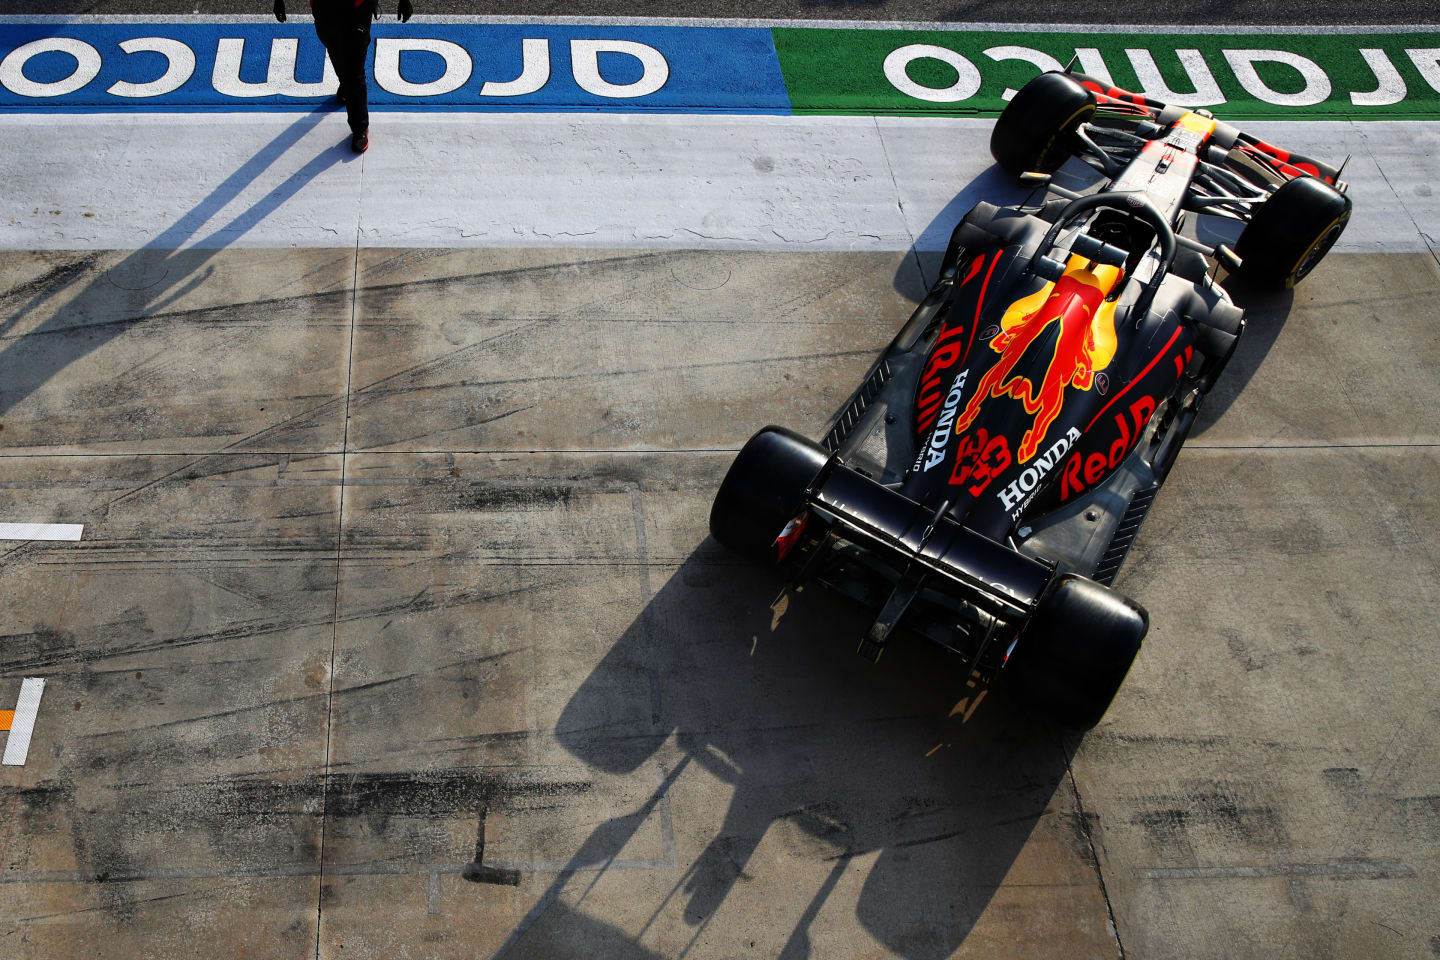 IMOLA, ITALY - OCTOBER 31: Max Verstappen of the Netherlands driving the (33) Aston Martin Red Bull Racing RB16 leaves the garage during qualifying ahead of the F1 Grand Prix of Emilia Romagna at Autodromo Enzo e Dino Ferrari on October 31, 2020 in Imola, Italy. (Photo by Mark Thompson/Getty Images)